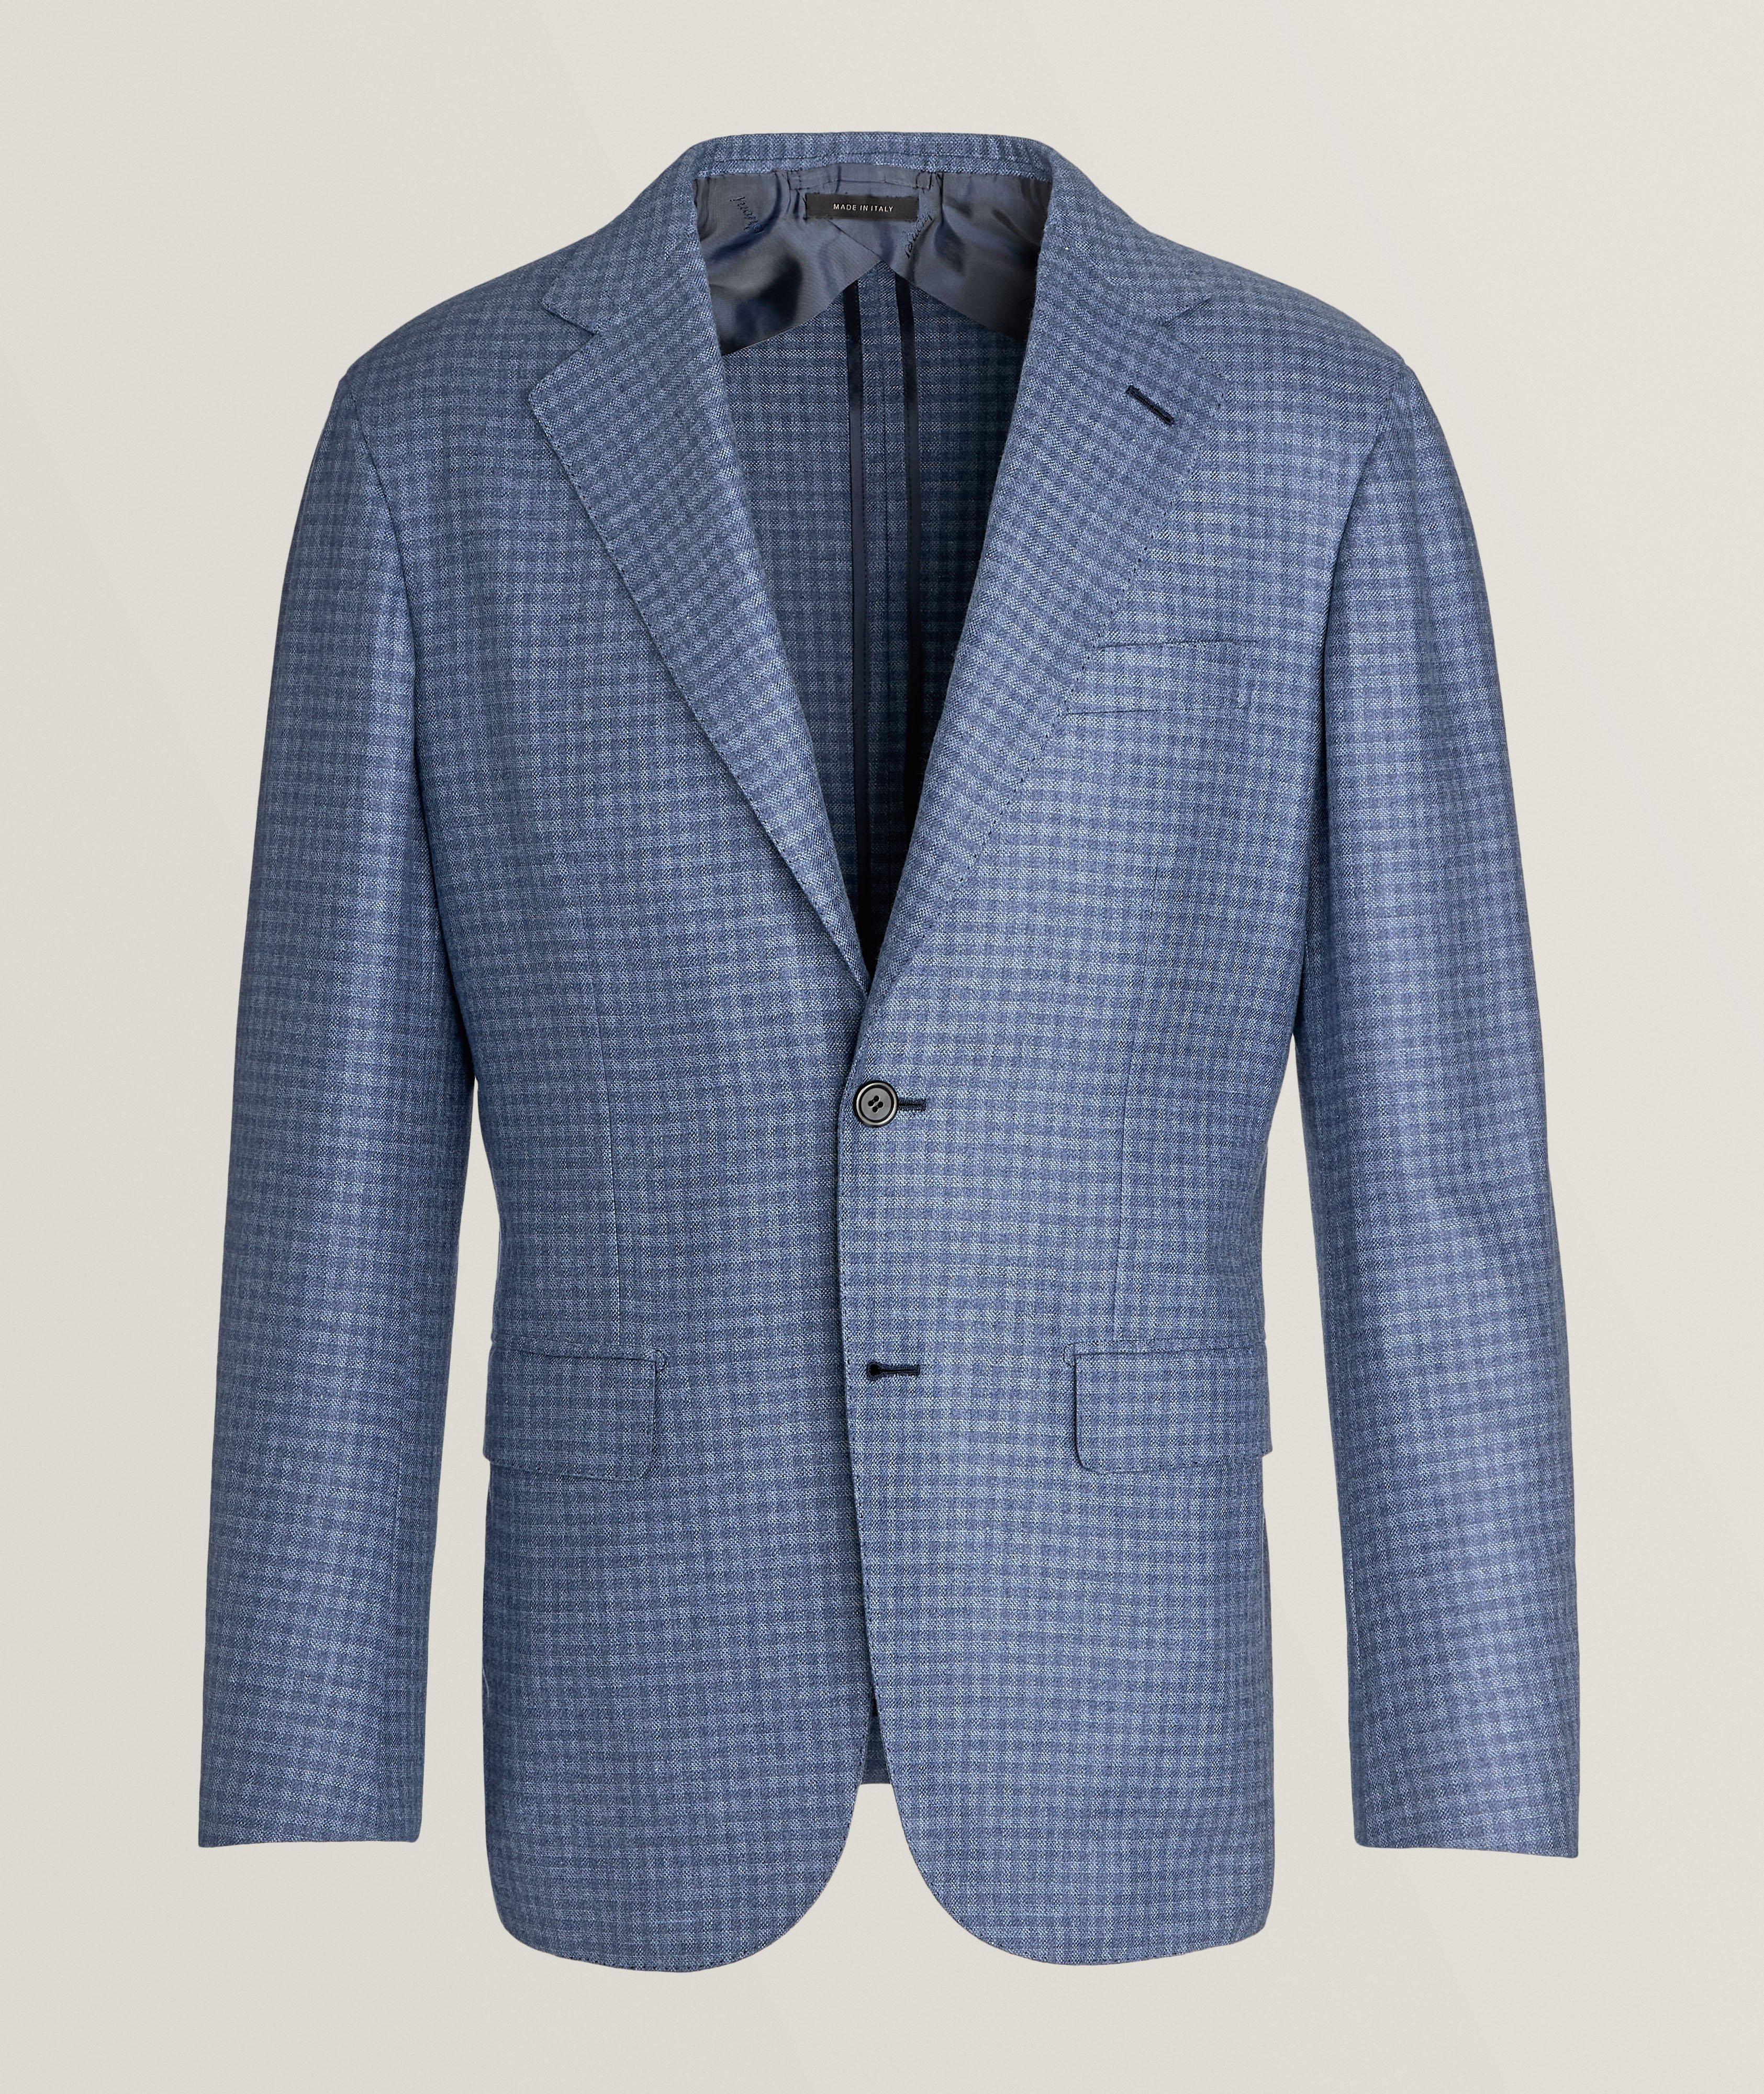 Giacca New Plume Checked Silk-Cashmere Sport Jacket  image 0